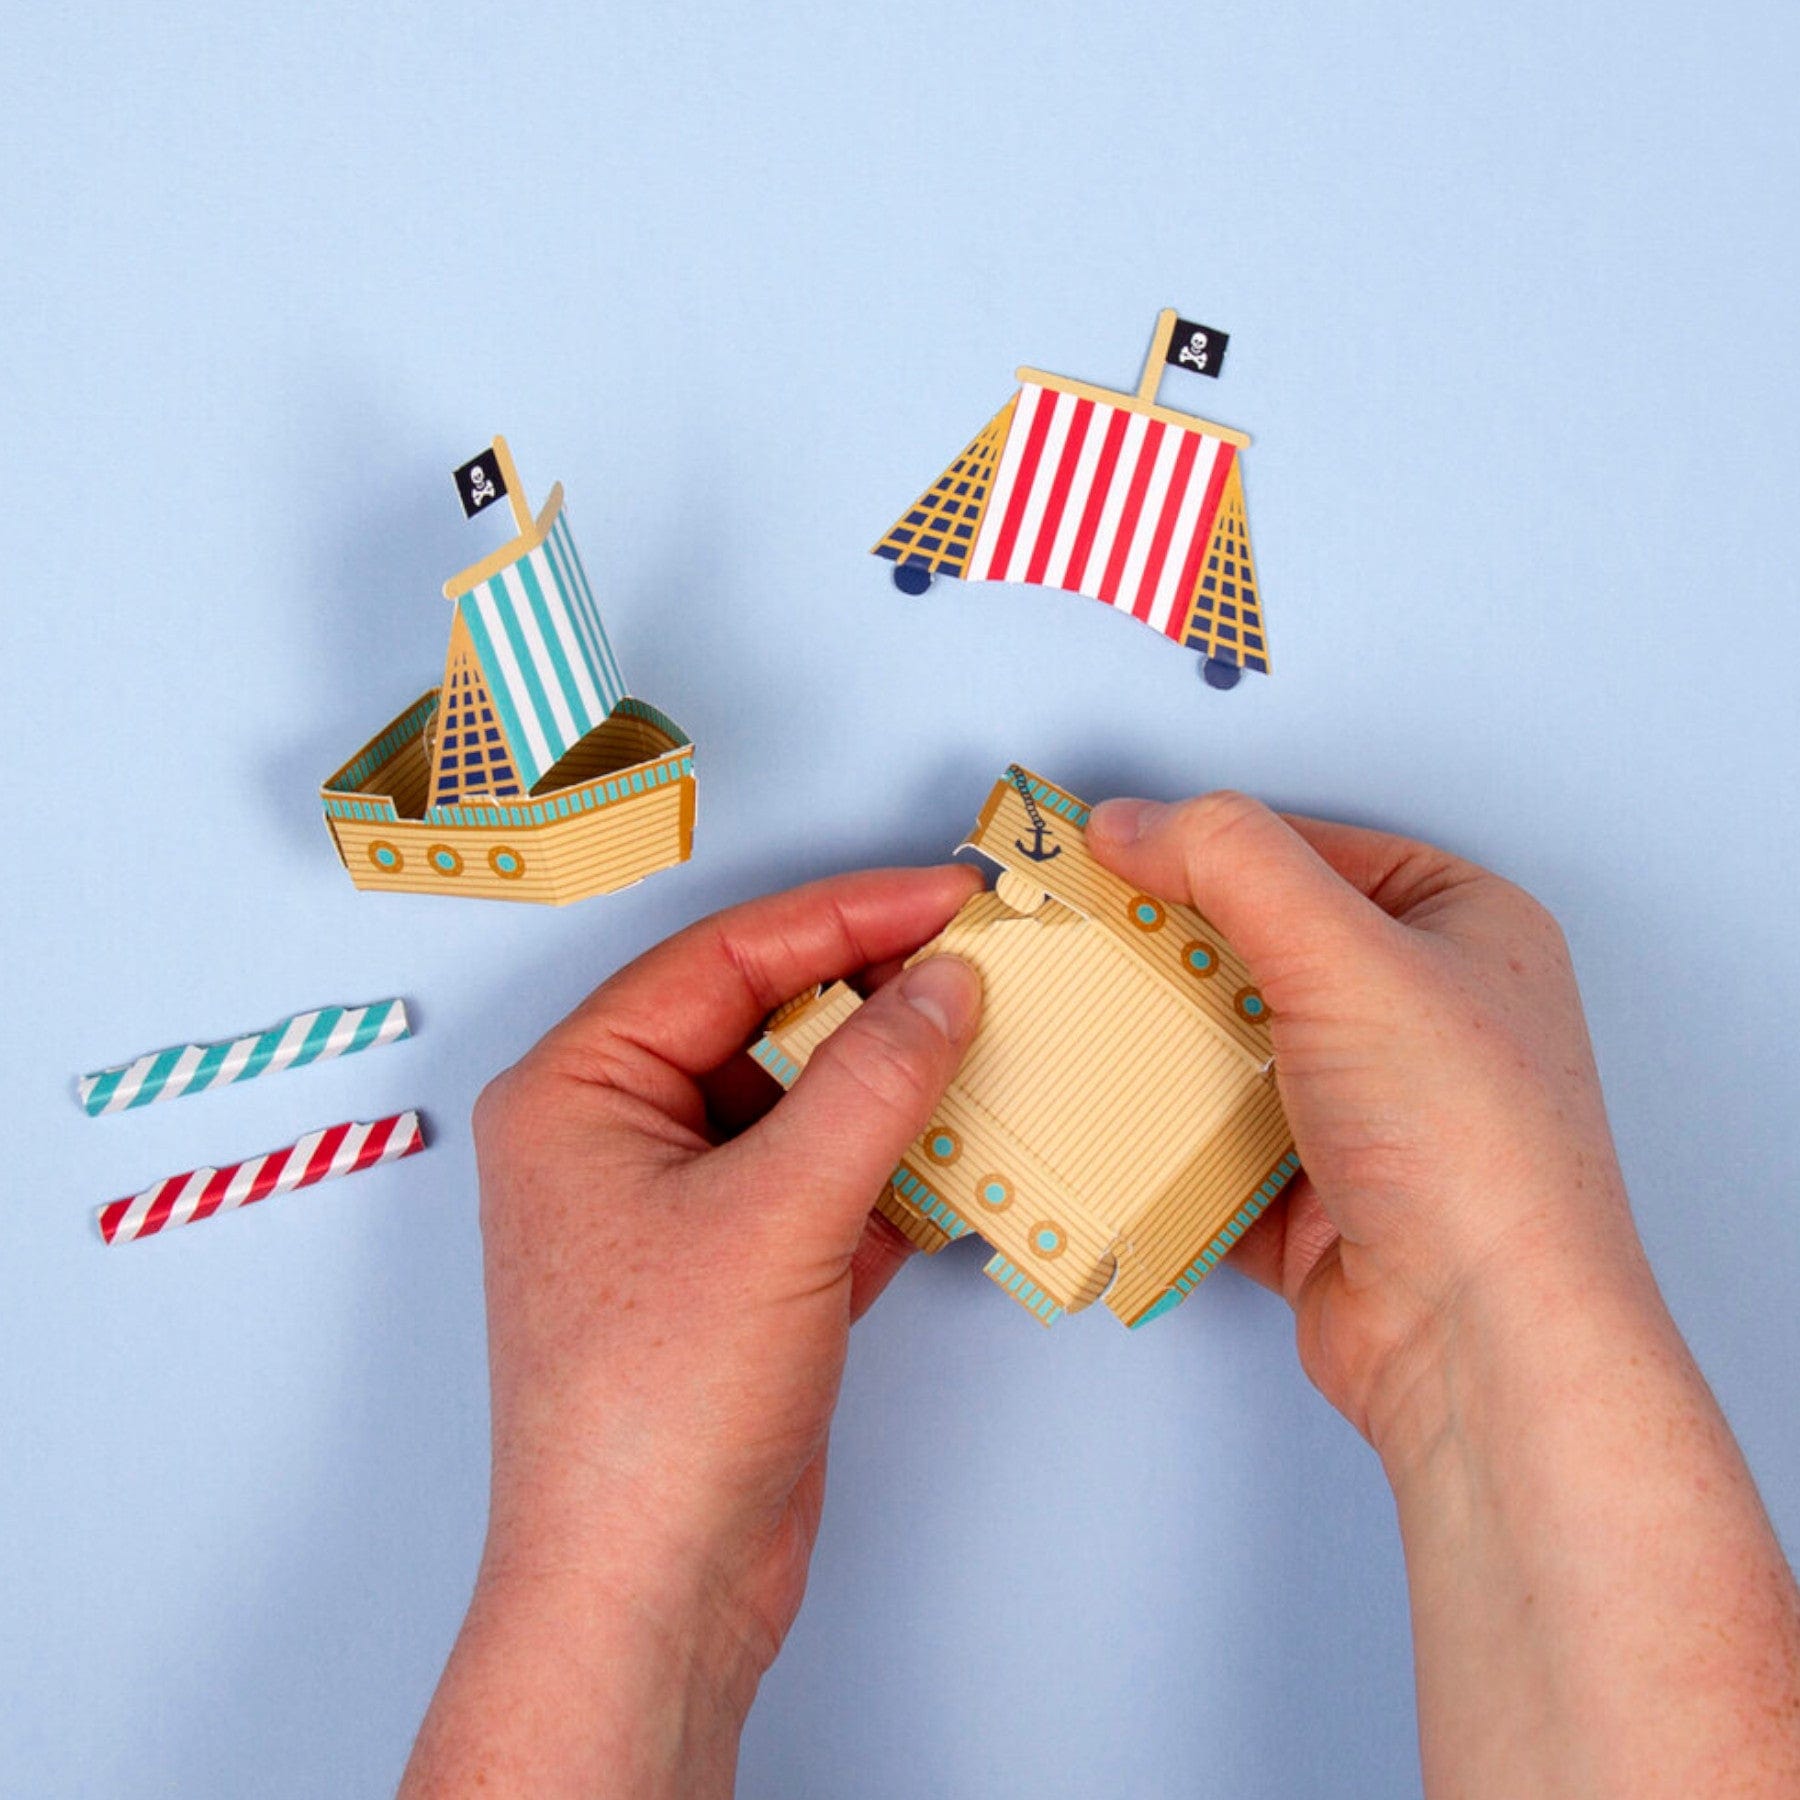 Hands assembling paper craft pirate ships with striped sails on a blue background